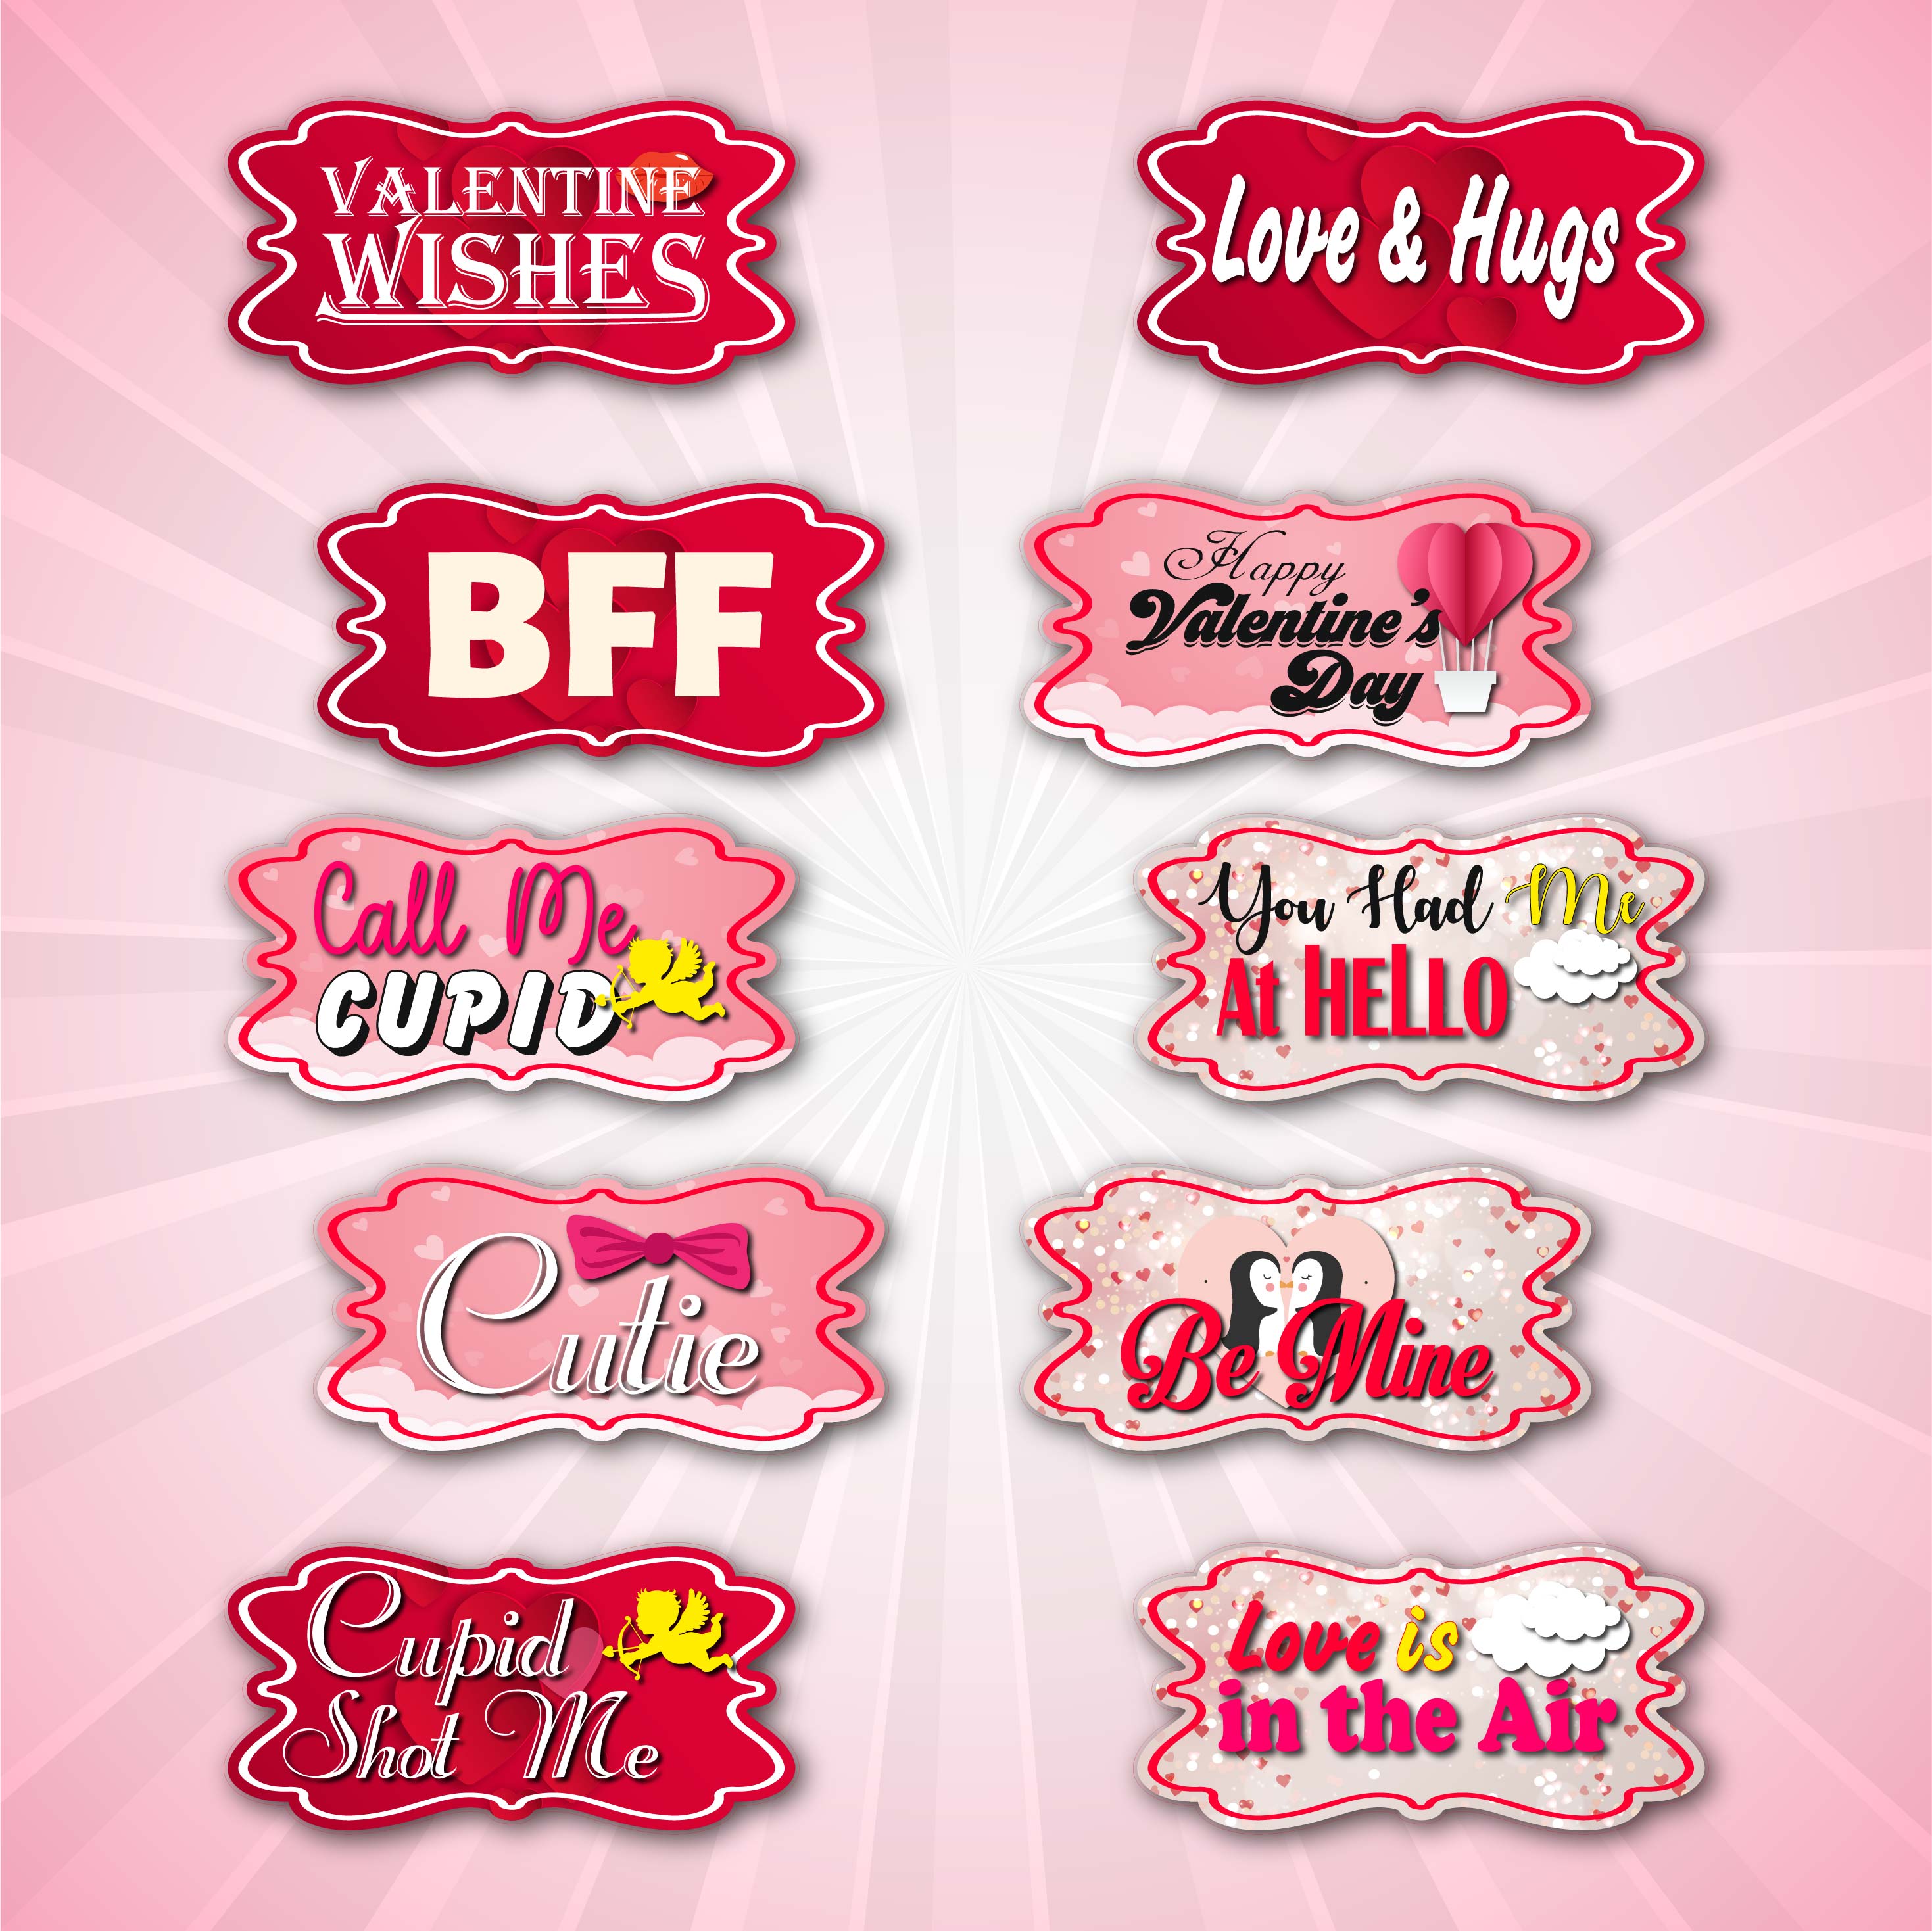 Valentines Day Signs includes Free Shipping